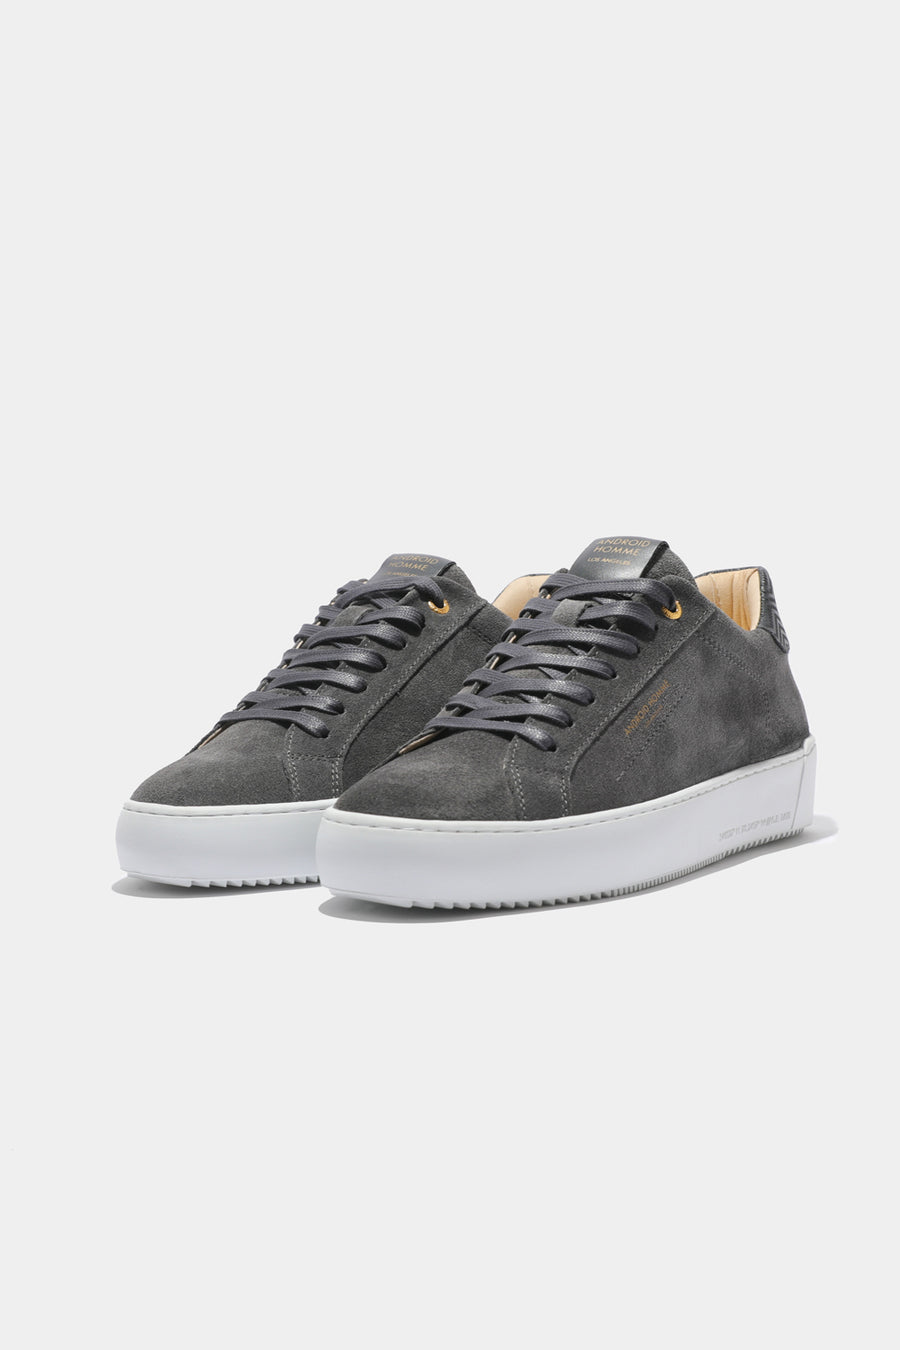 Buy the Android Homme Zuma Grey Suede Zig Zag Leather Sneaker at Intro. Spend £50 for free UK delivery. Official stockists. We ship worldwide.